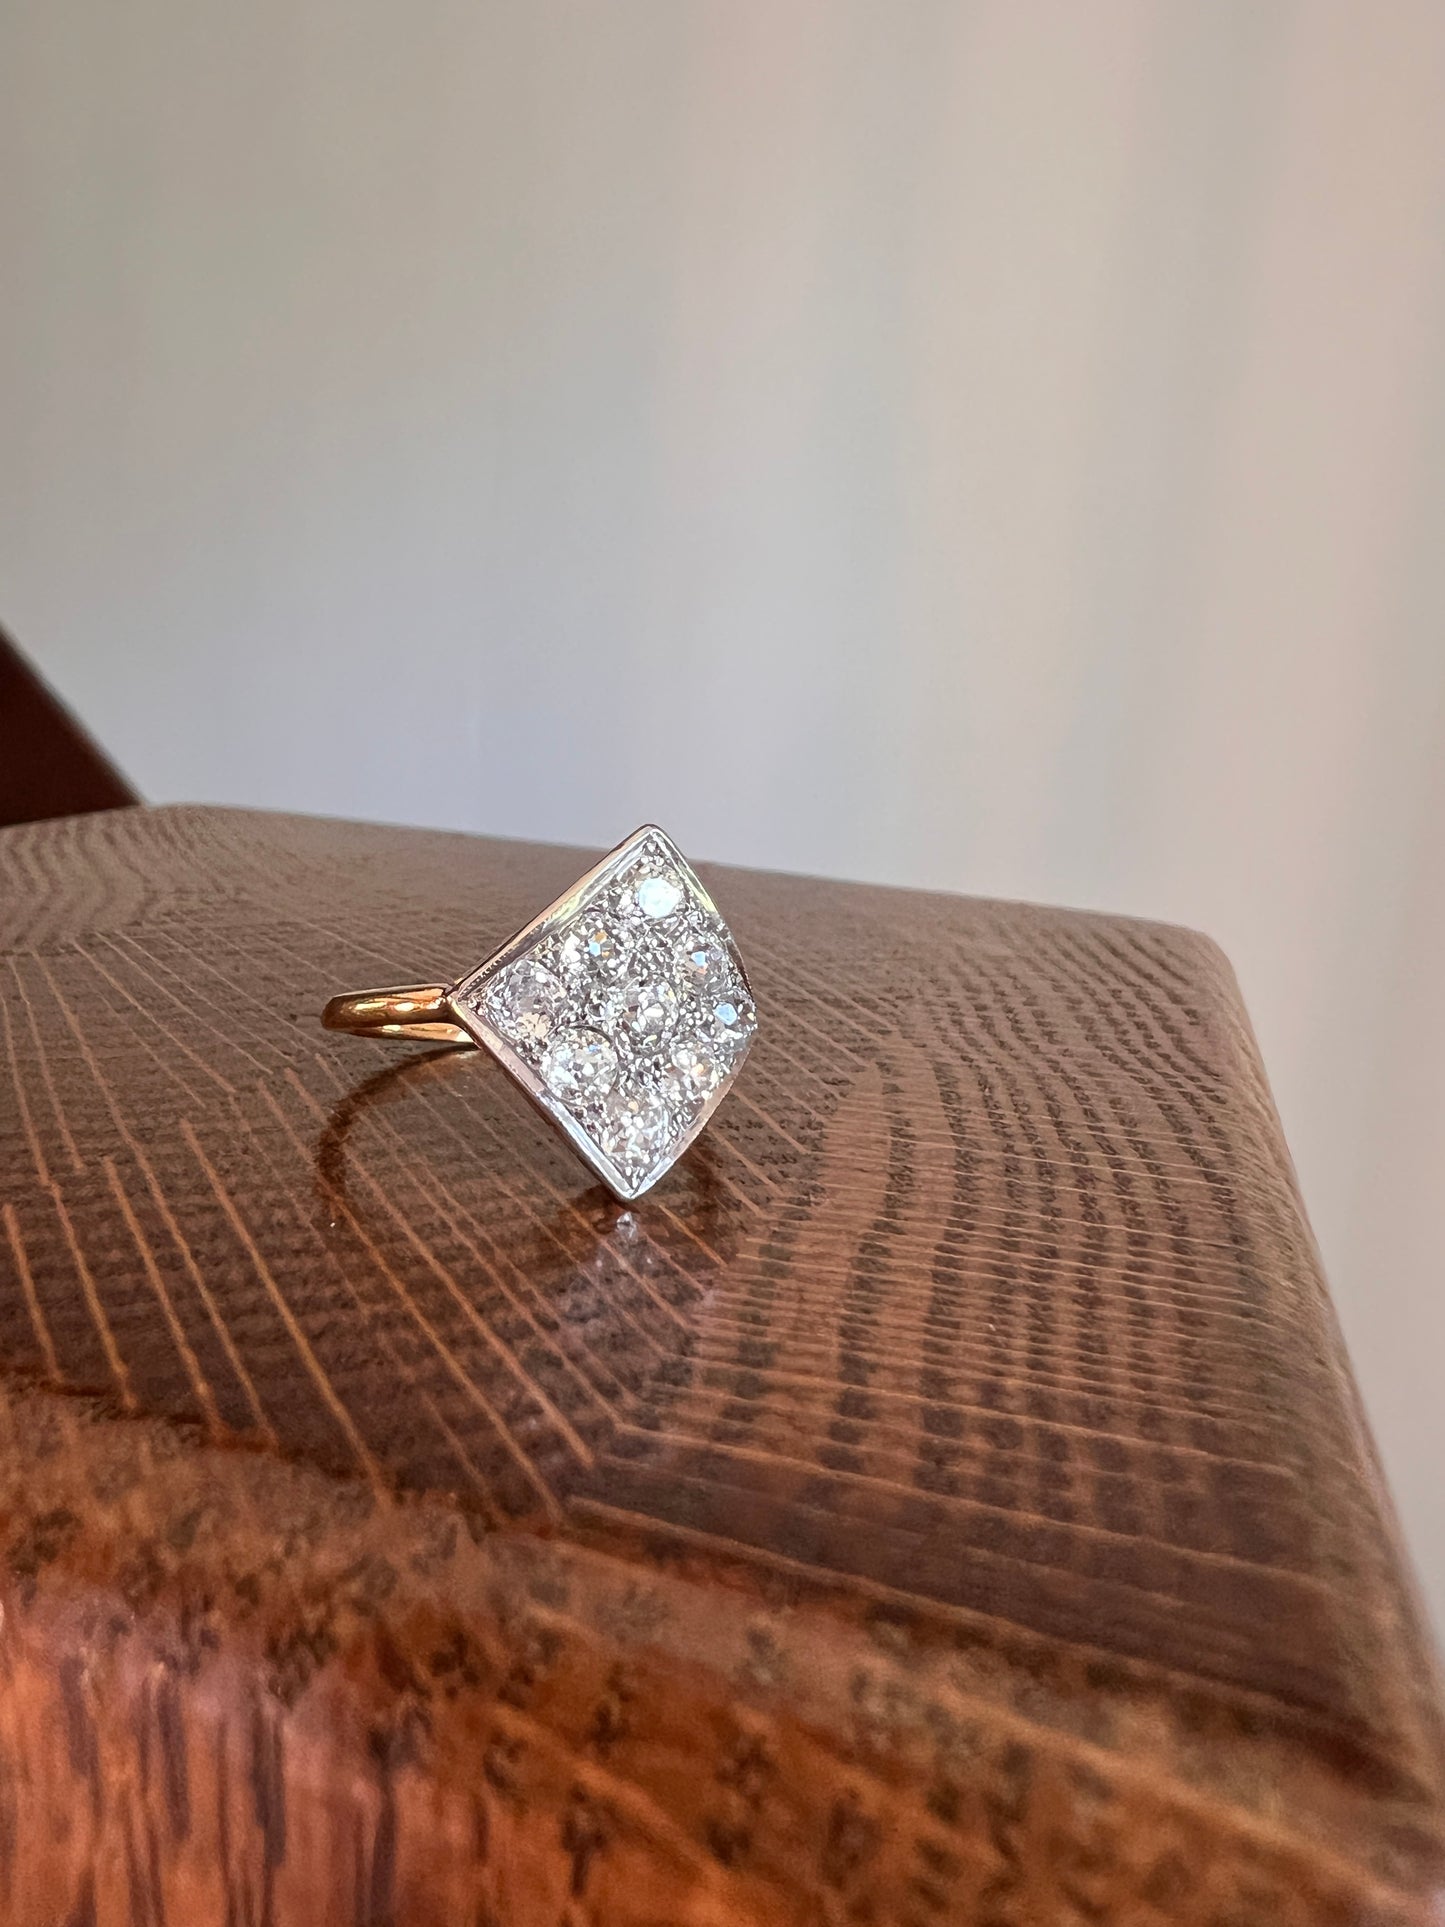 CURVED Unique 1.25 Carat Nine Old Mine Cut DIAMOND Cluster Kite Grid Ring French Antique 18k Gold